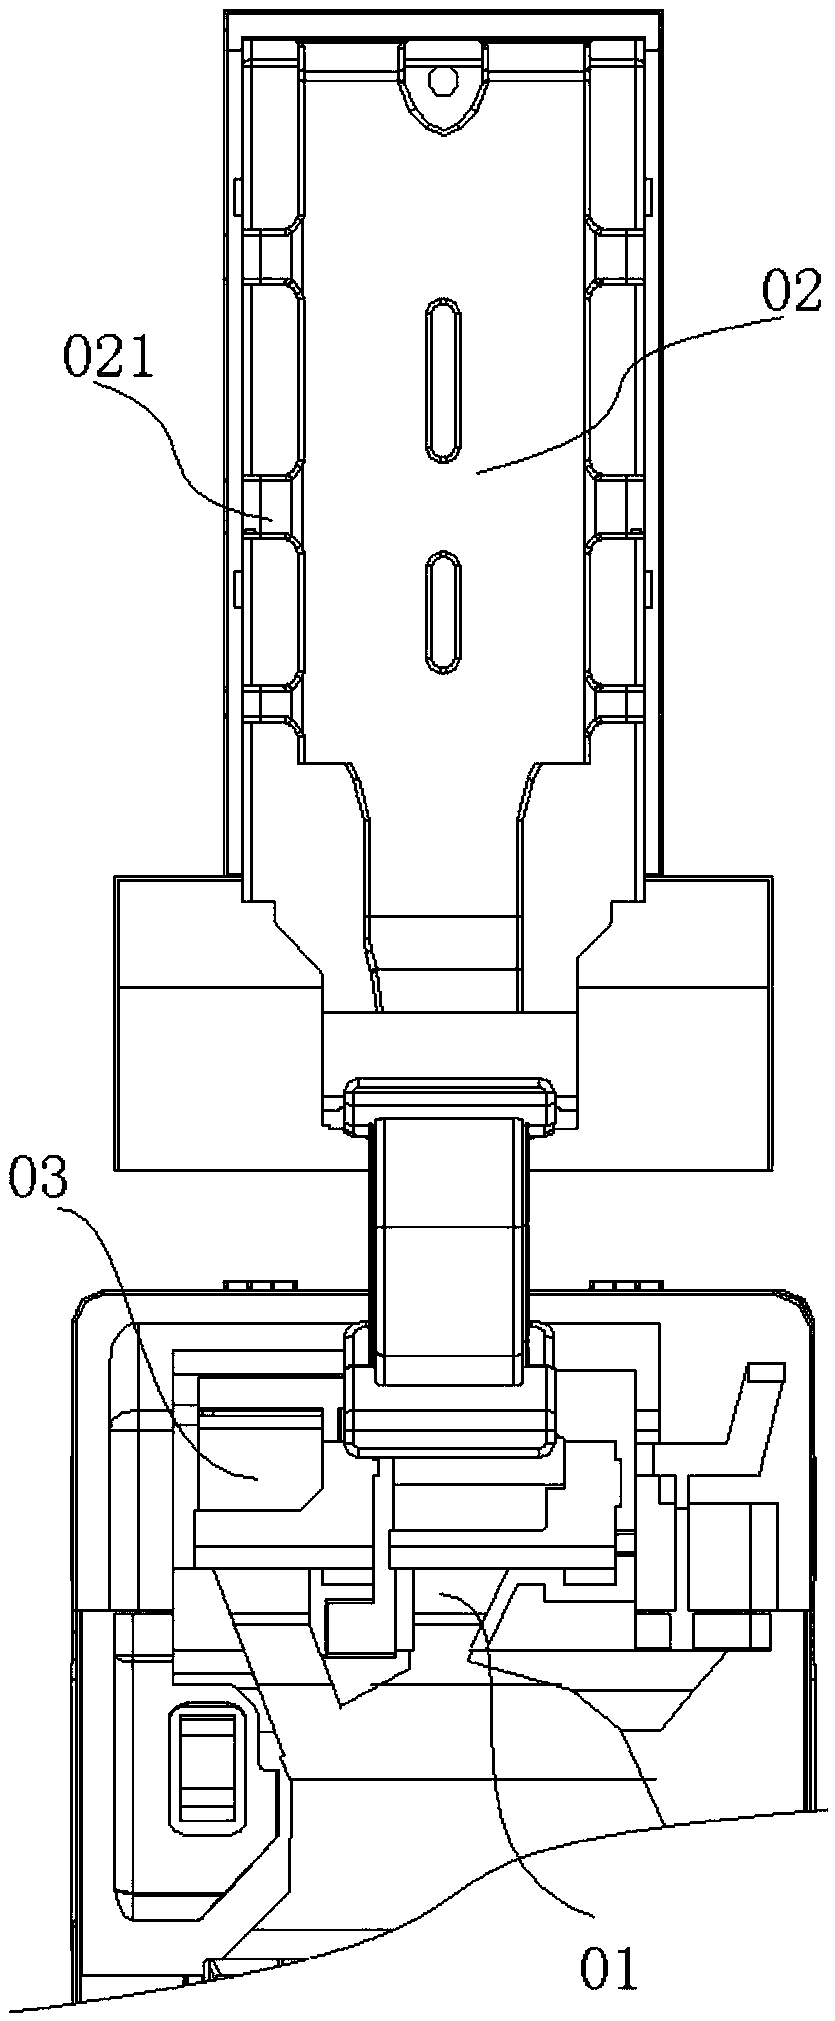 Single-system air-cooled refrigerator